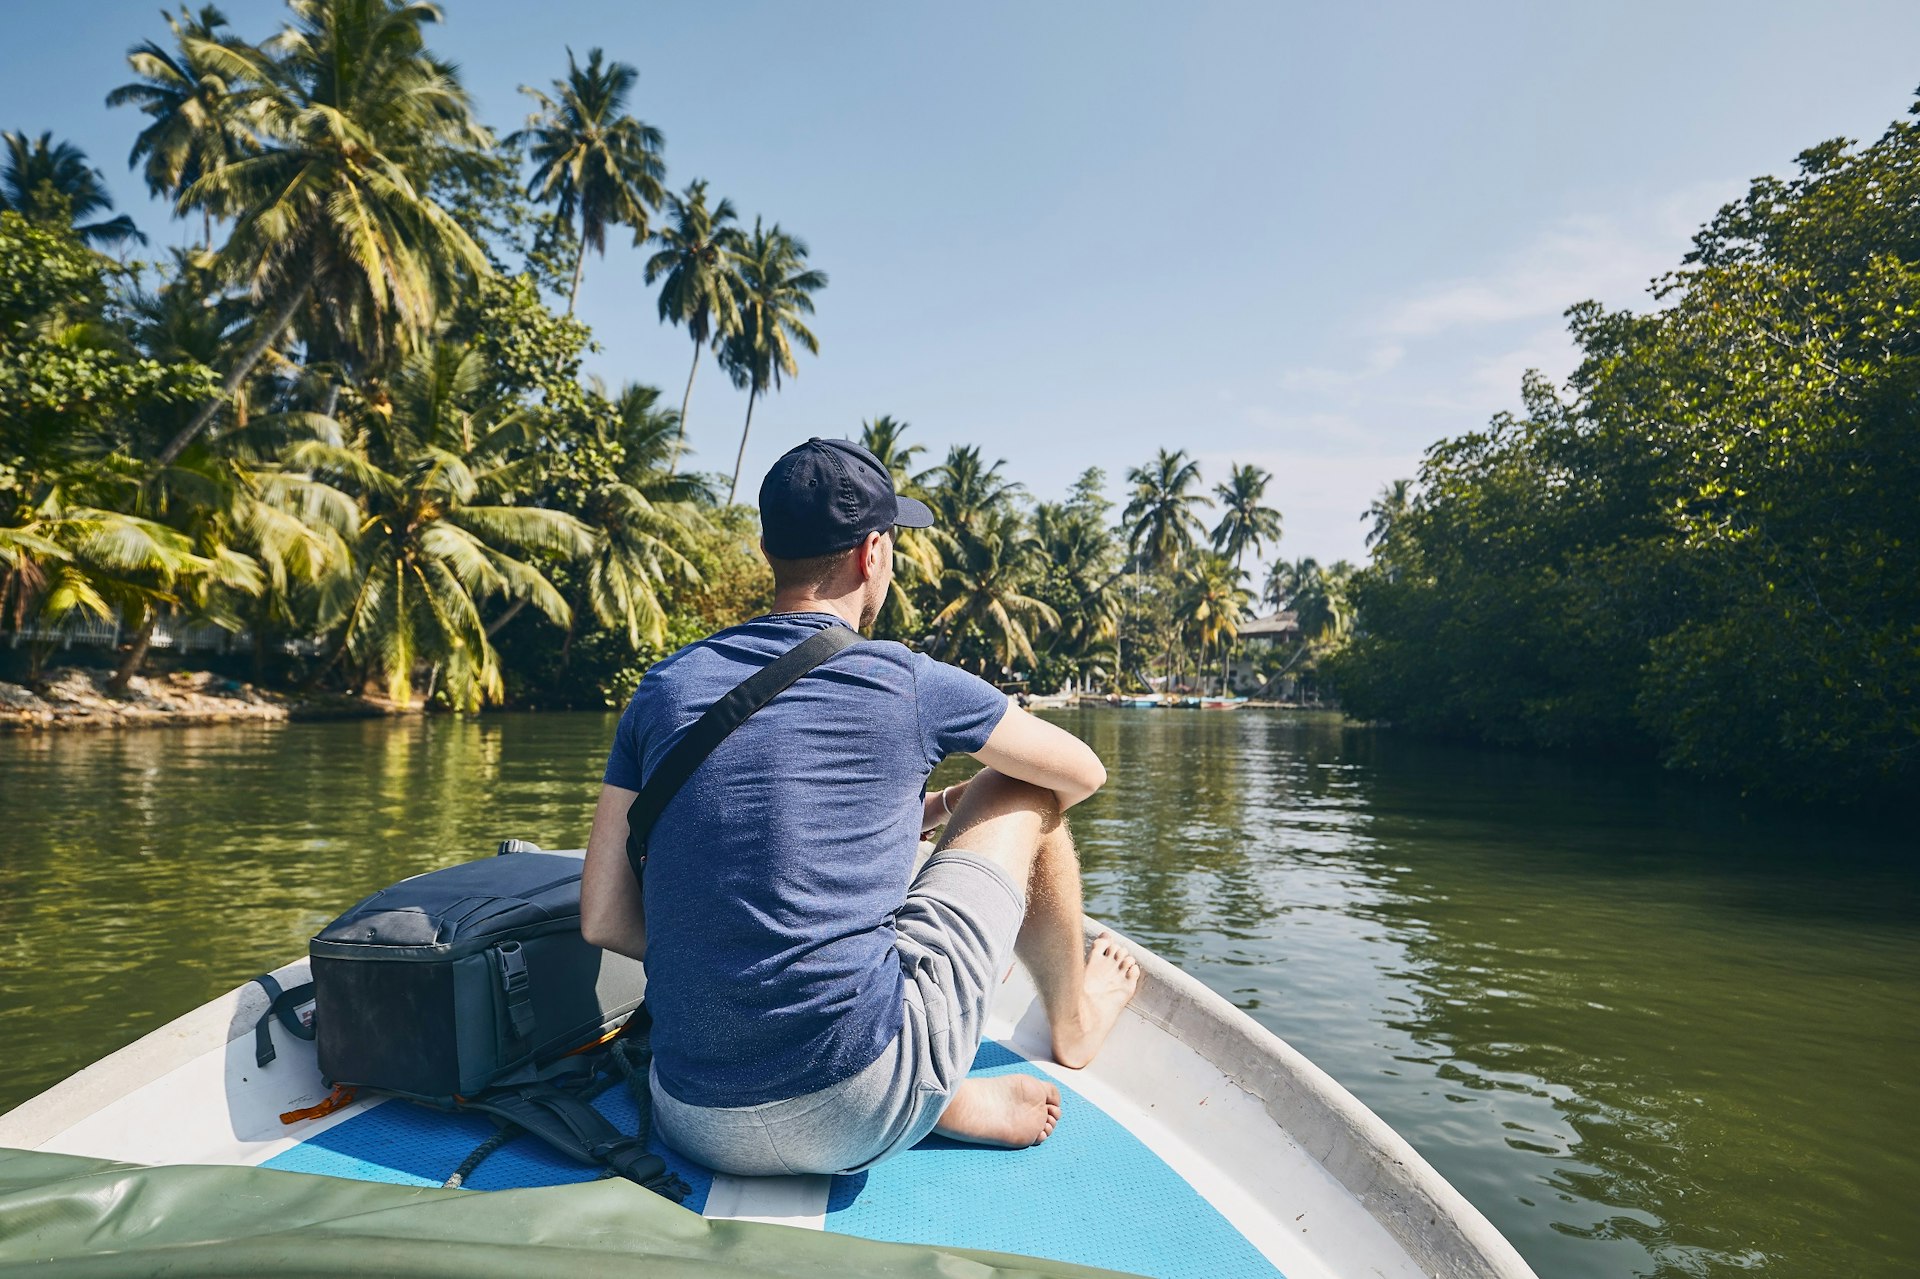 A man in shorts, T-shirt and baseball cap sits at the bow of a small boat as it heads along the Madu River; the banks are lined with palms and other trees.